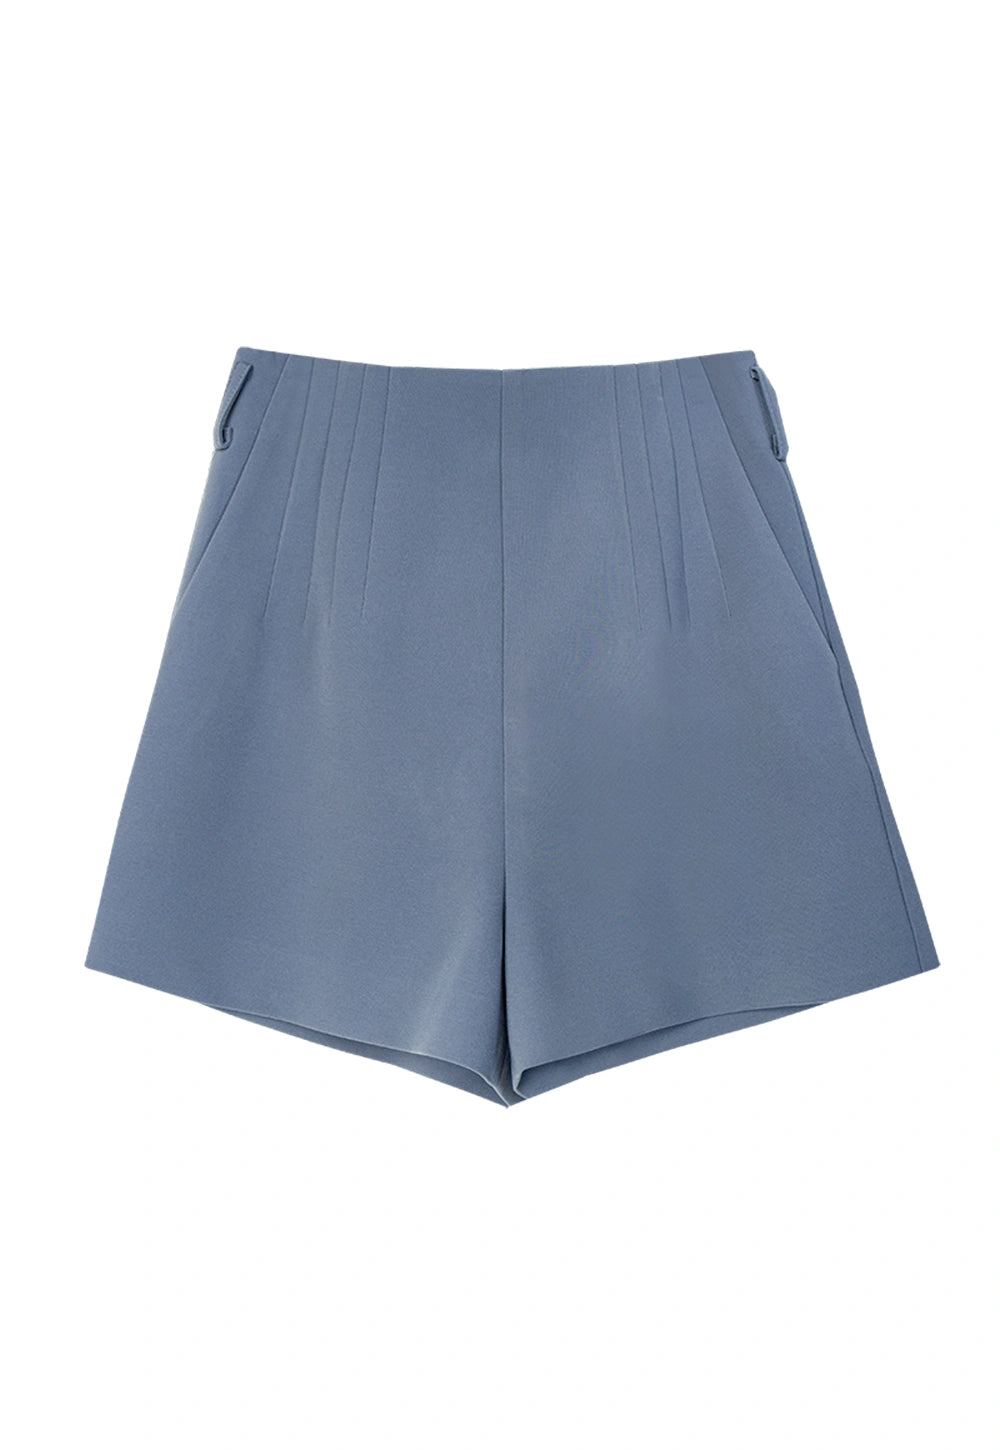 Women's Blue Pleated Shorts - High Waist, Tailored Fit, Perfect for Summer Casual or Dressy Occasions